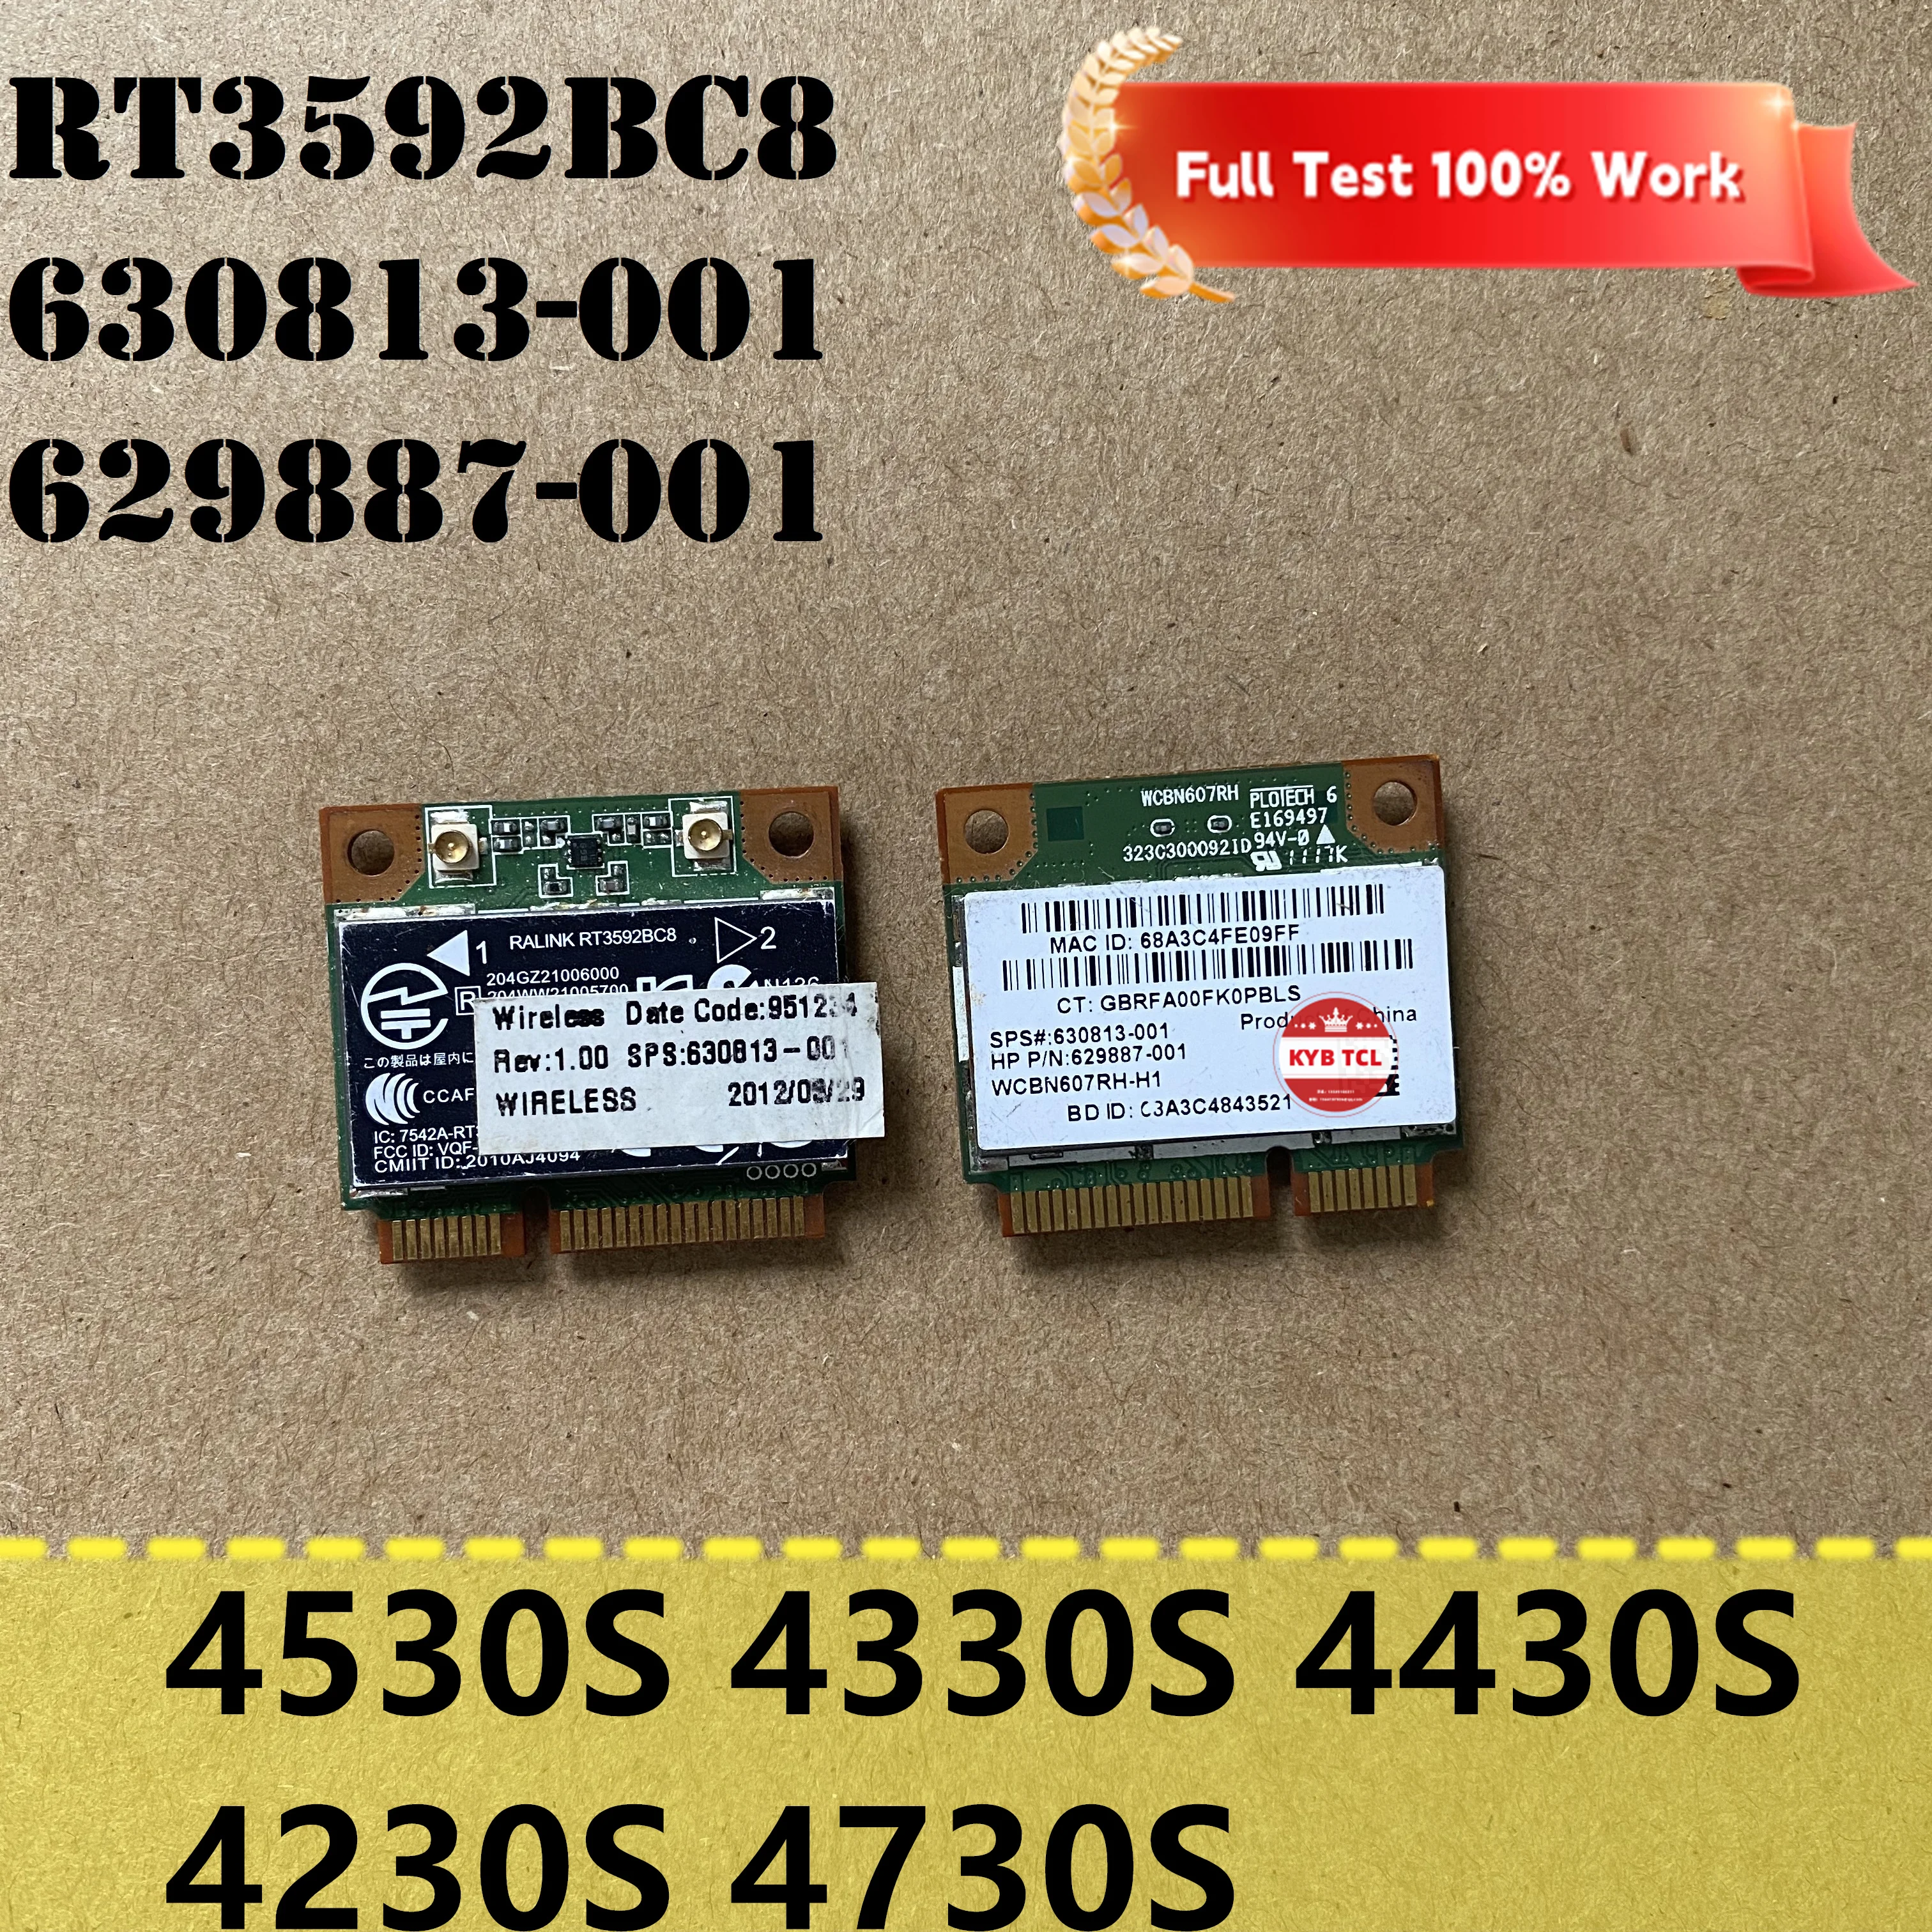 

For HP 4530S 4330S 4430S 4230S 4730S Laptop RT3592BC8 Wireless WIFI Bluetooth 3.0 Mini PCI-E 300M Card 630813-001 629887-001